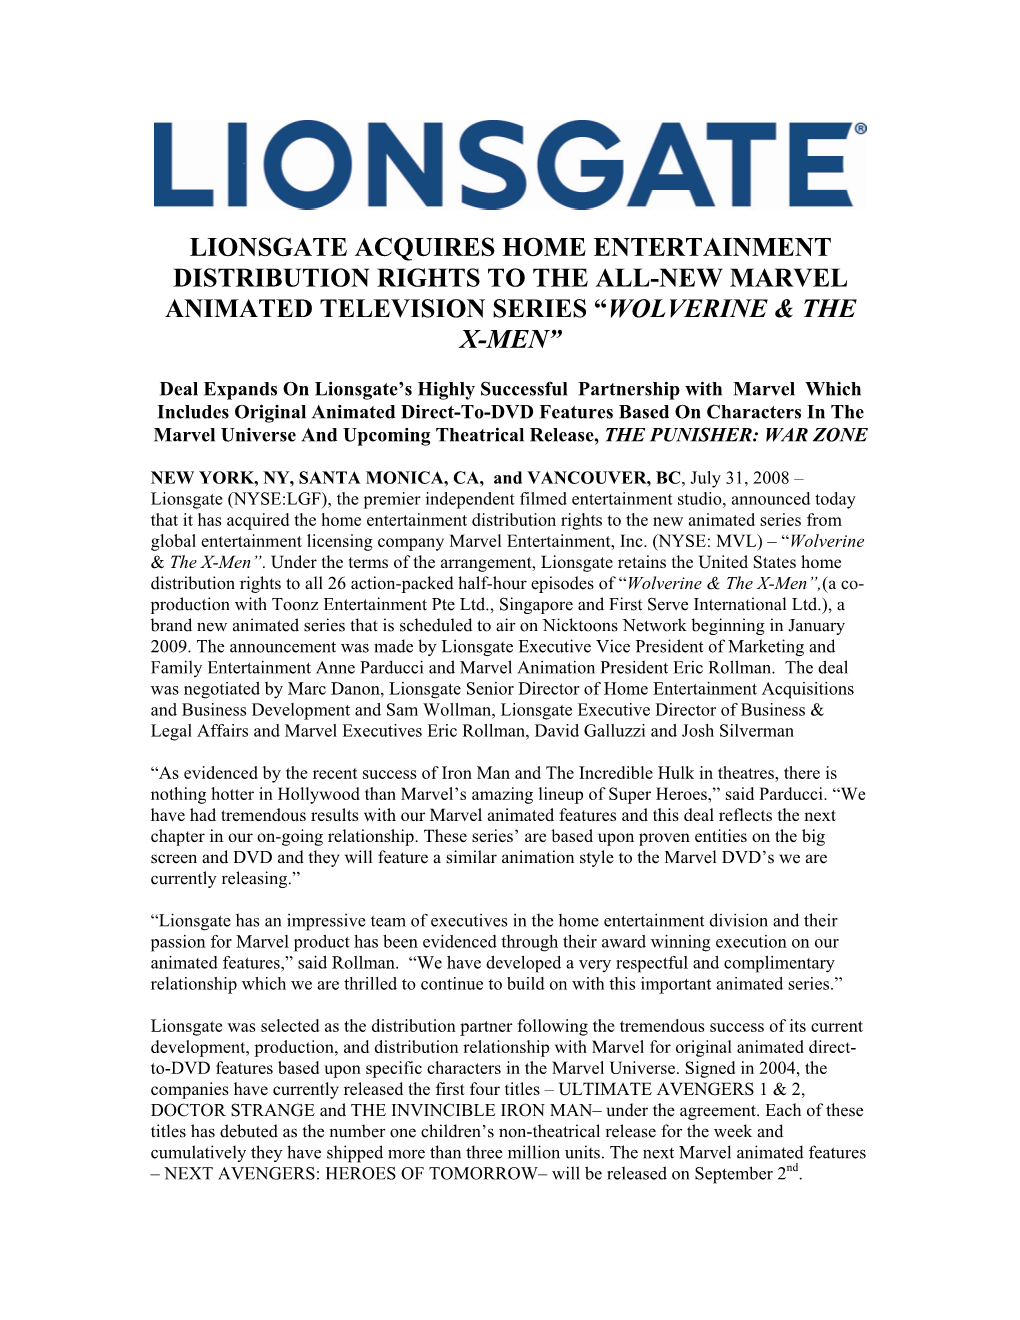 Lionsgate Acquires Home Entertainment Distribution Rights to the All-New Marvel Animated Television Series “Wolverine & the X-Men”